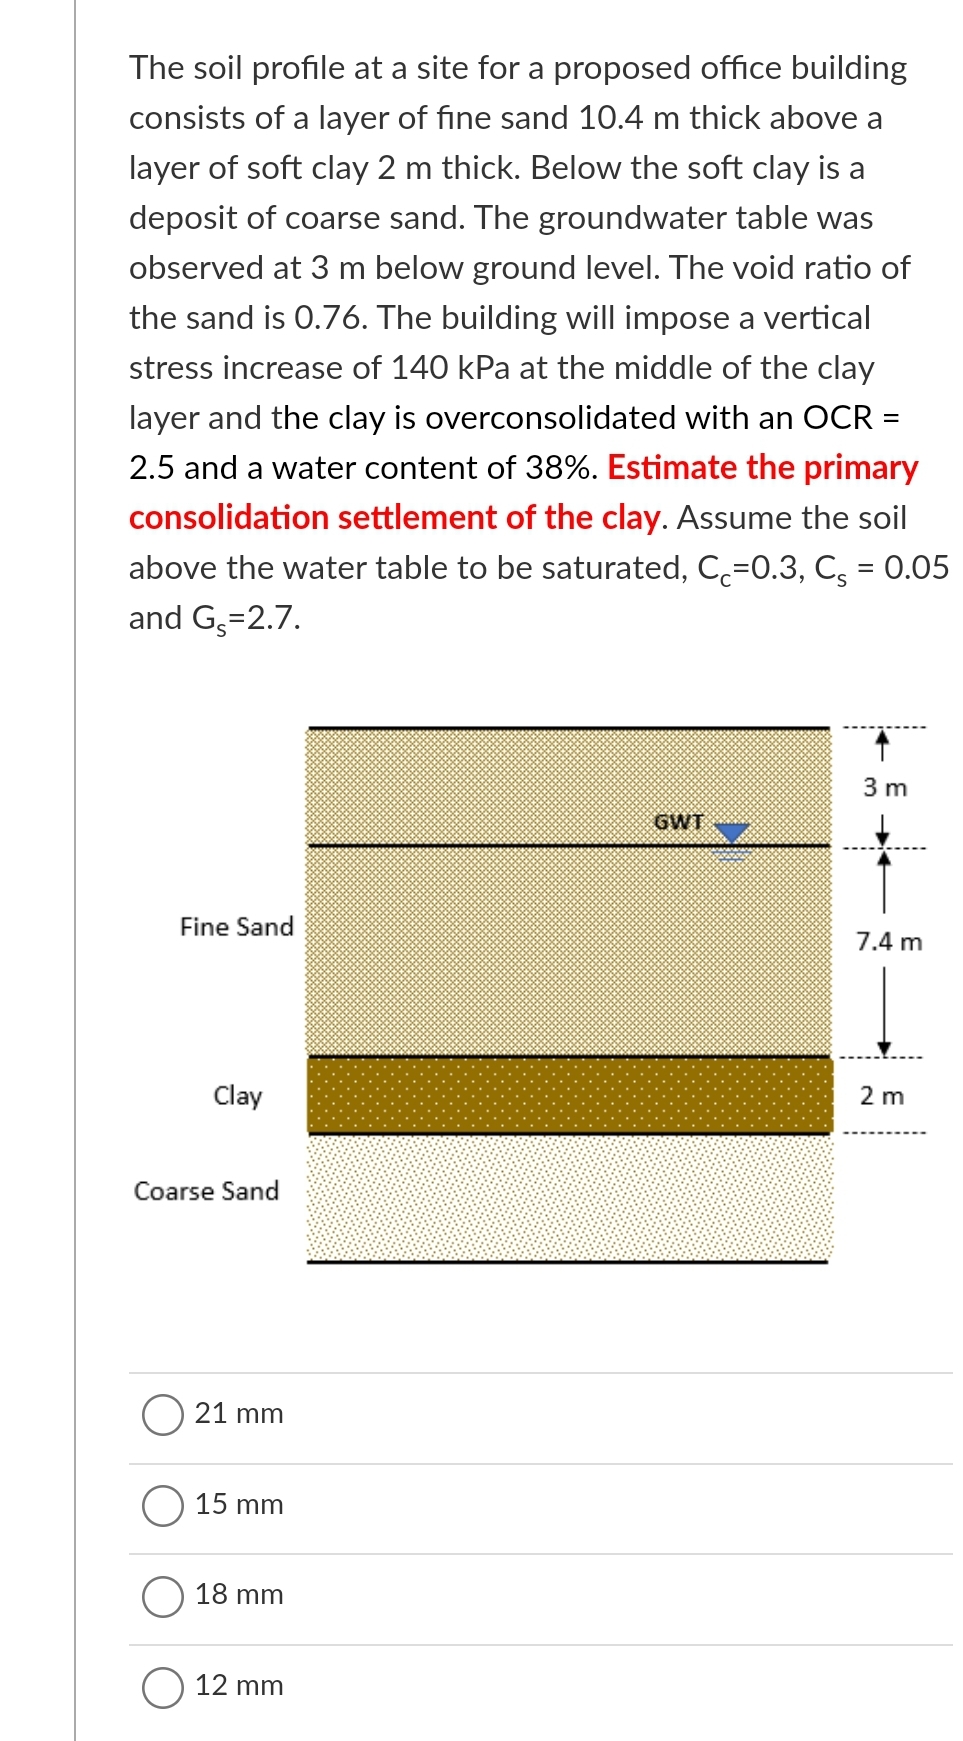 The soil profile at a site for a proposed office building
consists of a layer of fine sand 10.4 m thick above a
layer of soft clay 2 m thick. Below the soft clay is a
deposit of coarse sand. The groundwater table was
observed at 3 m below ground level. The void ratio of
the sand is 0.76. The building will impose a vertical
stress increase of 140 kPa at the middle of the clay
layer and the clay is overconsolidated with an OCR =
2.5 and a water content of 38%. Estimate the primary
consolidation settlement of the clay. Assume the soil
above the water table to be saturated, C=0.3, C; = 0.05
and G,=2.7.
3 m
GWT
Fine Sand
7.4 m
Clay
2 m
Coarse Sand
21 mm
15 mm
18 mm
O 12 mm
